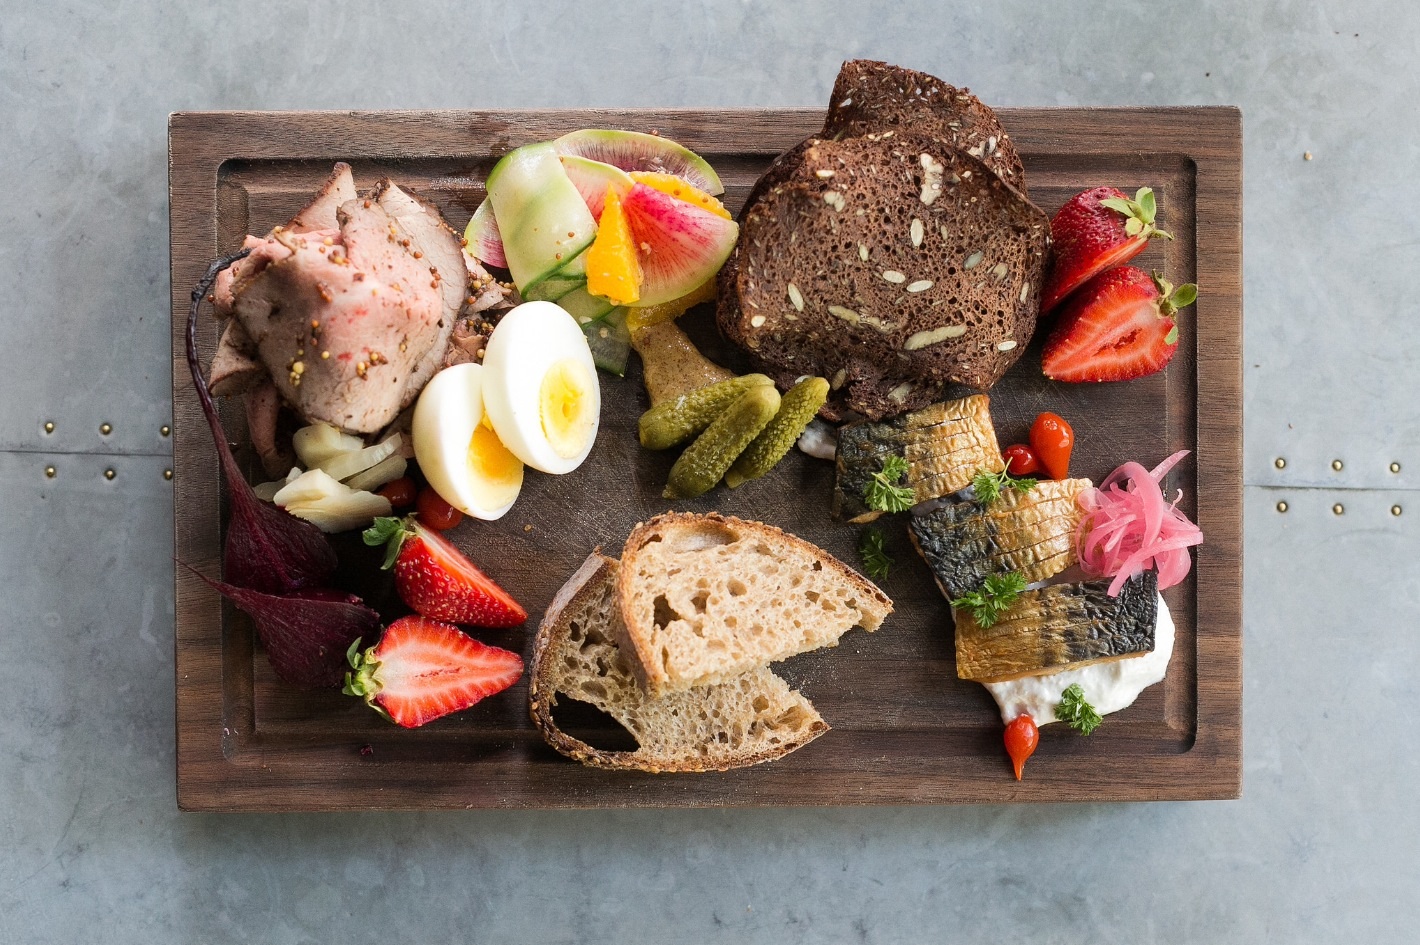 Farmer's Lunch:  Assorted house made charcuterie with traditional garnishes $17